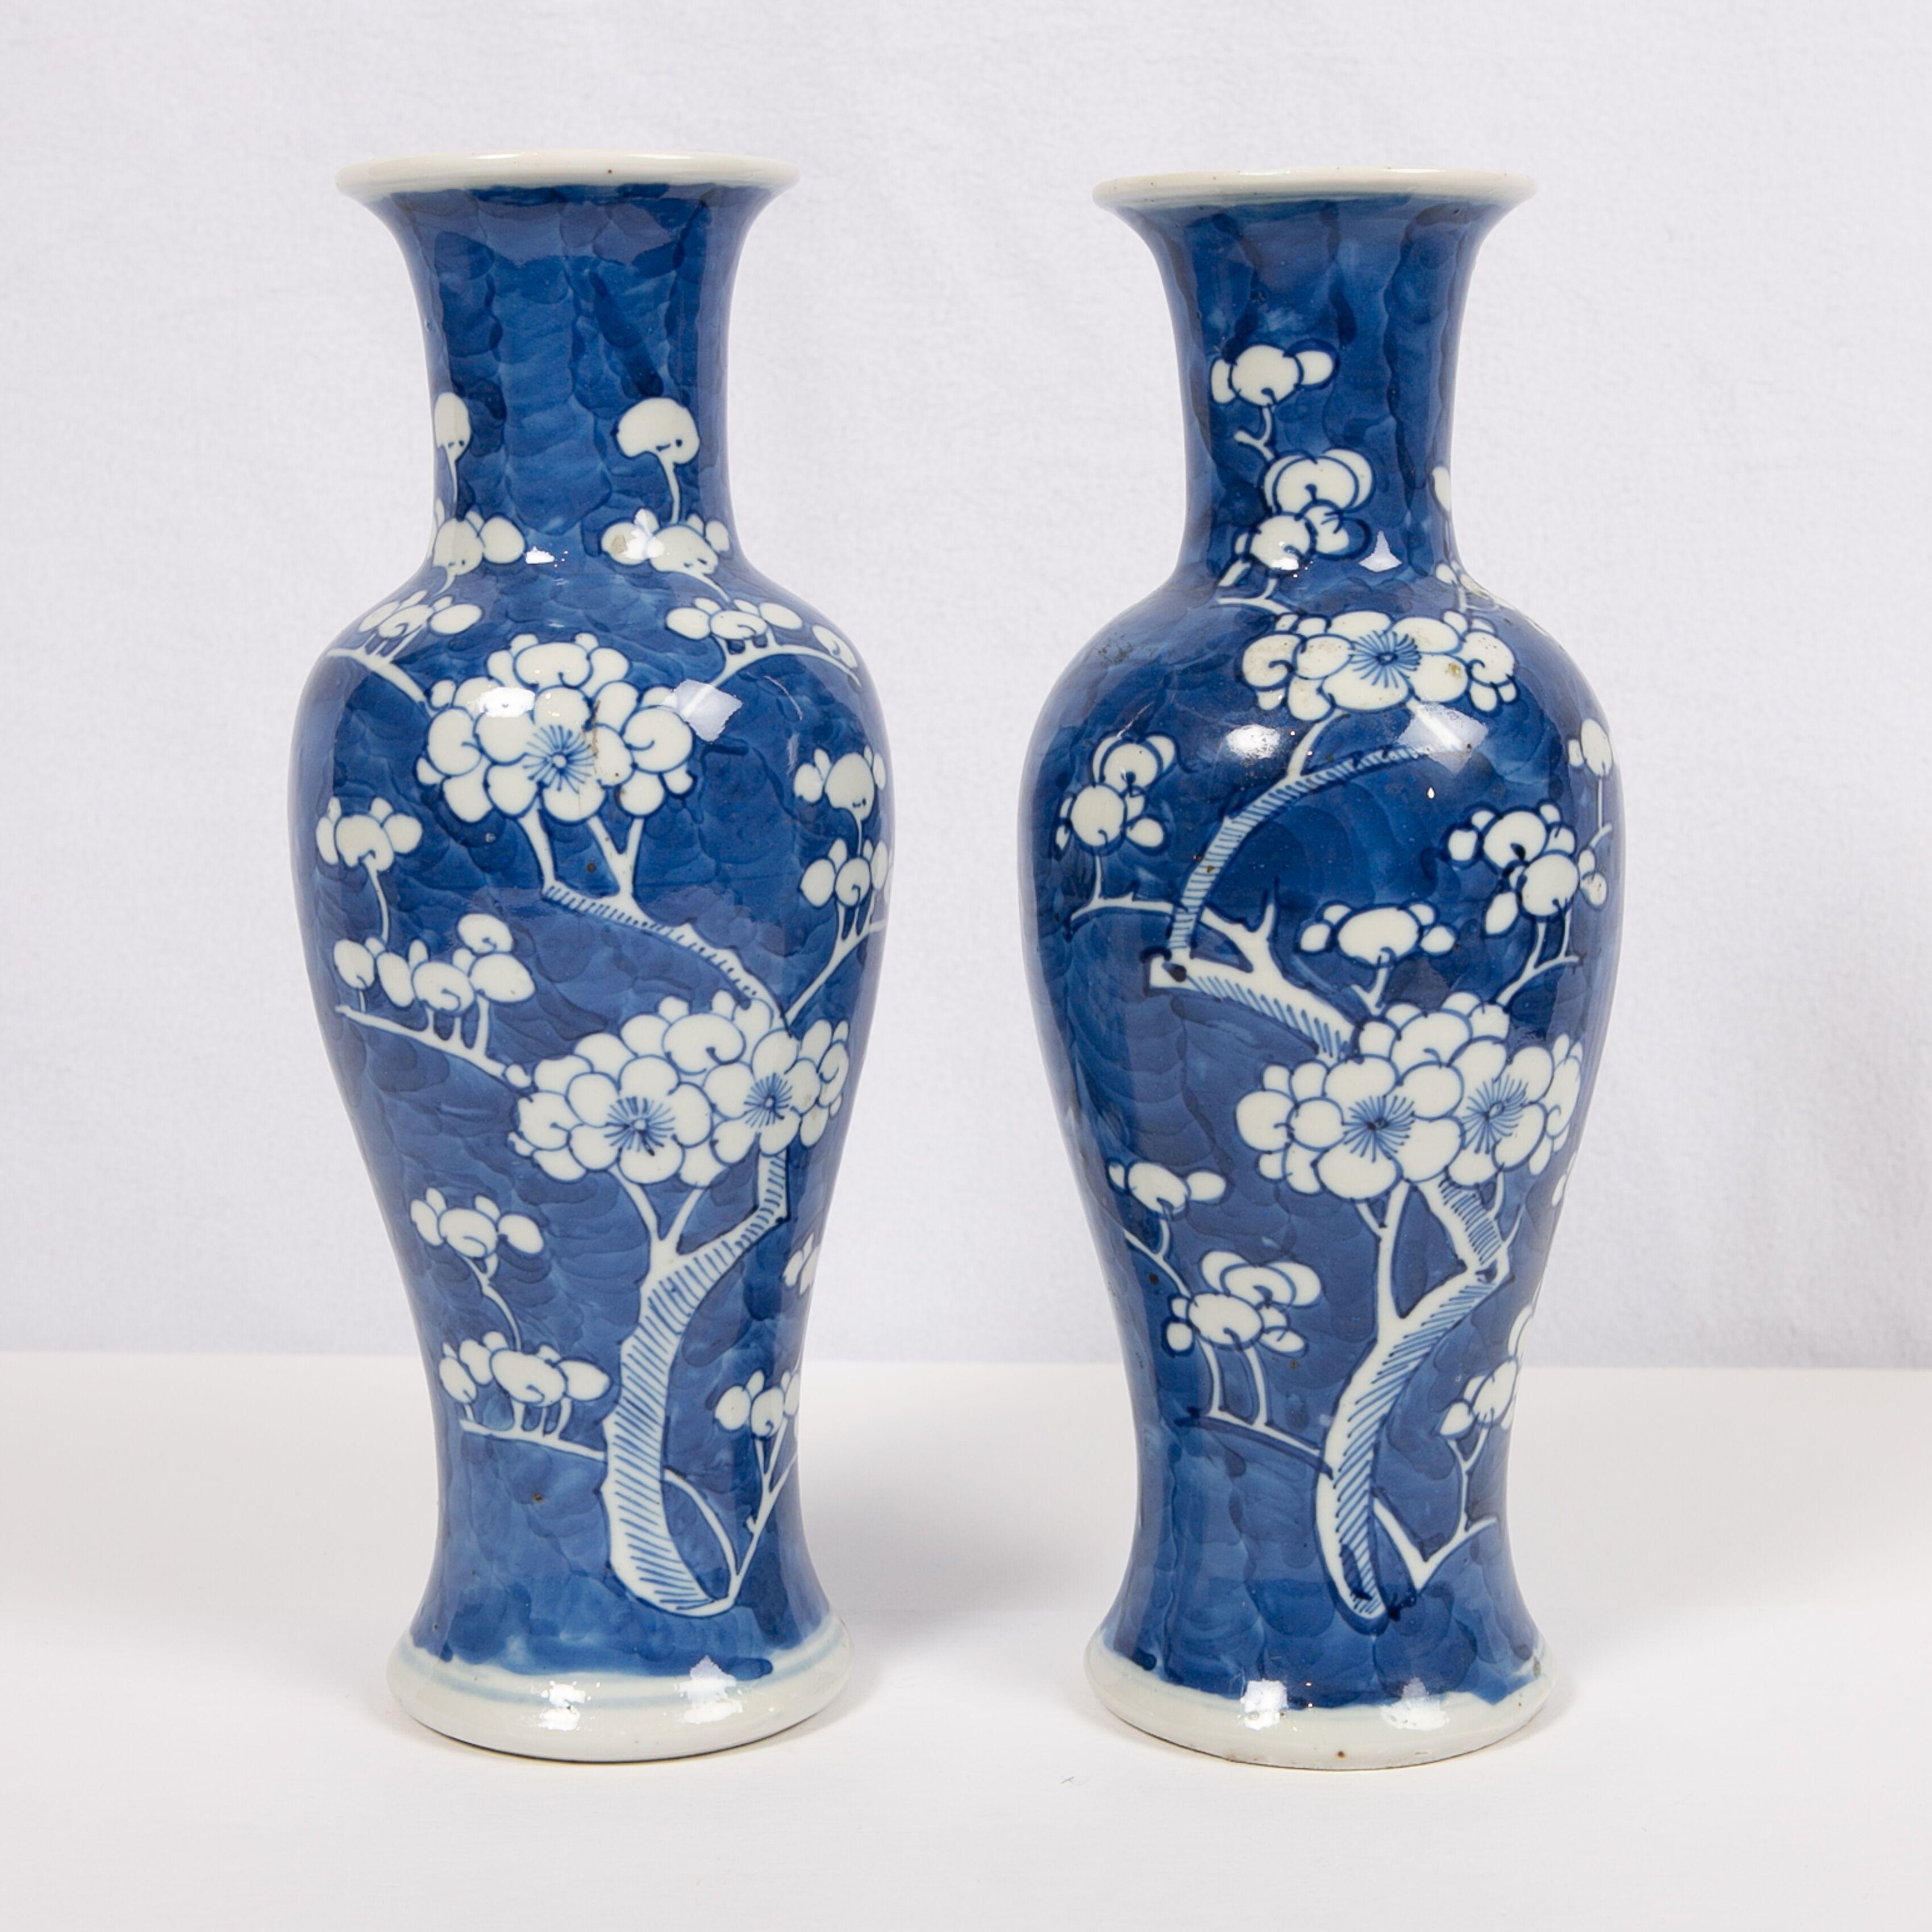 We are pleased to offer this pair of antique Chinese blue and white porcelain vases made in the late Qing period of the 19th century, circa 1880. They are decorated with white plum blossoms. The white blossoms are set on a blue ground with subtle